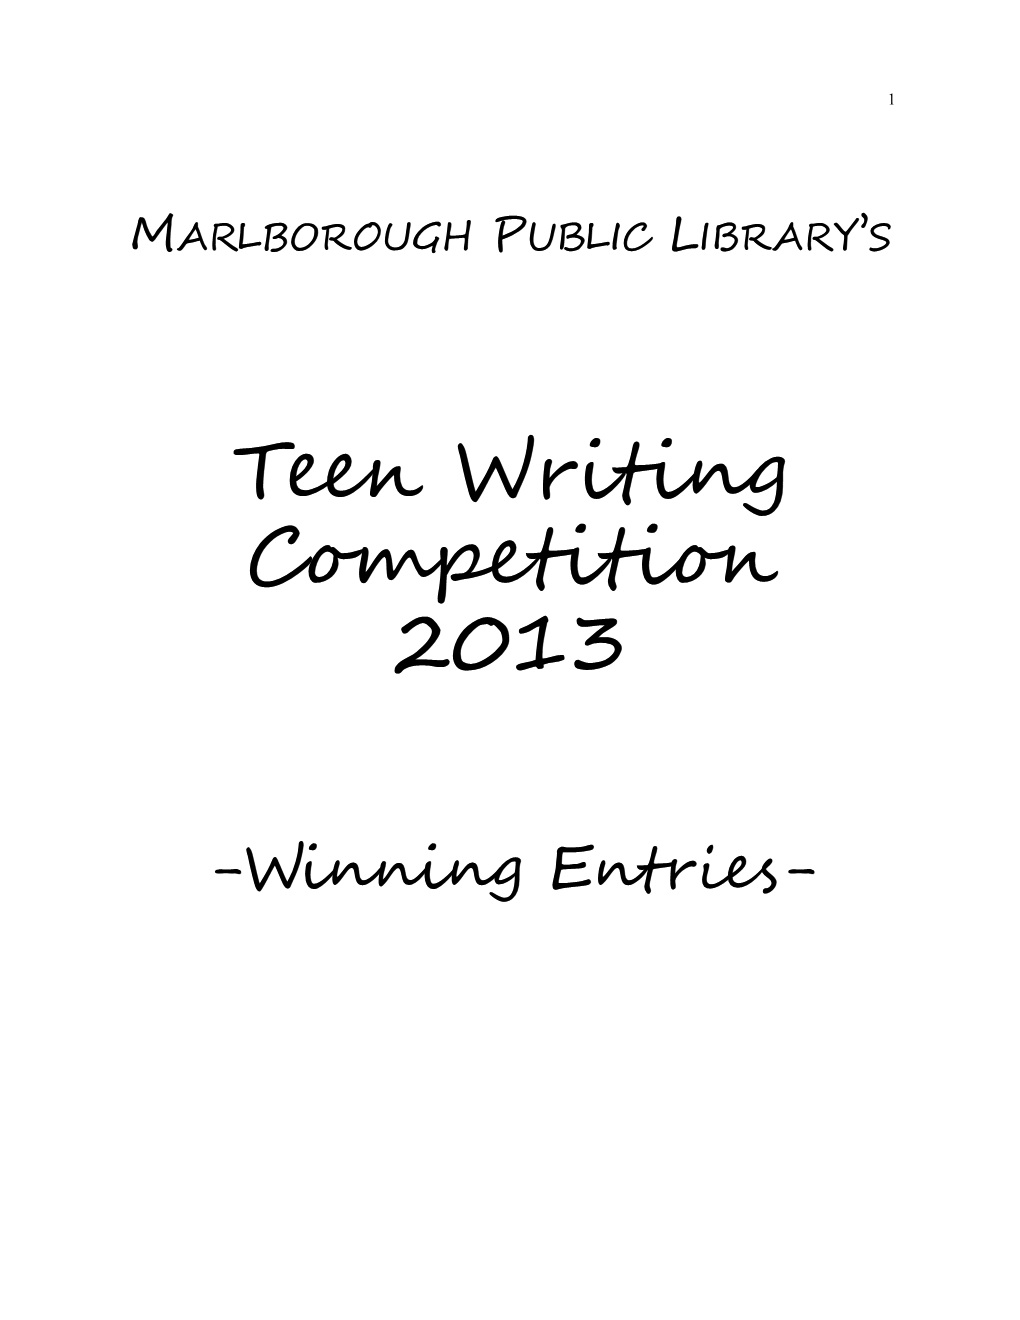 Teen Writing Competition 2013